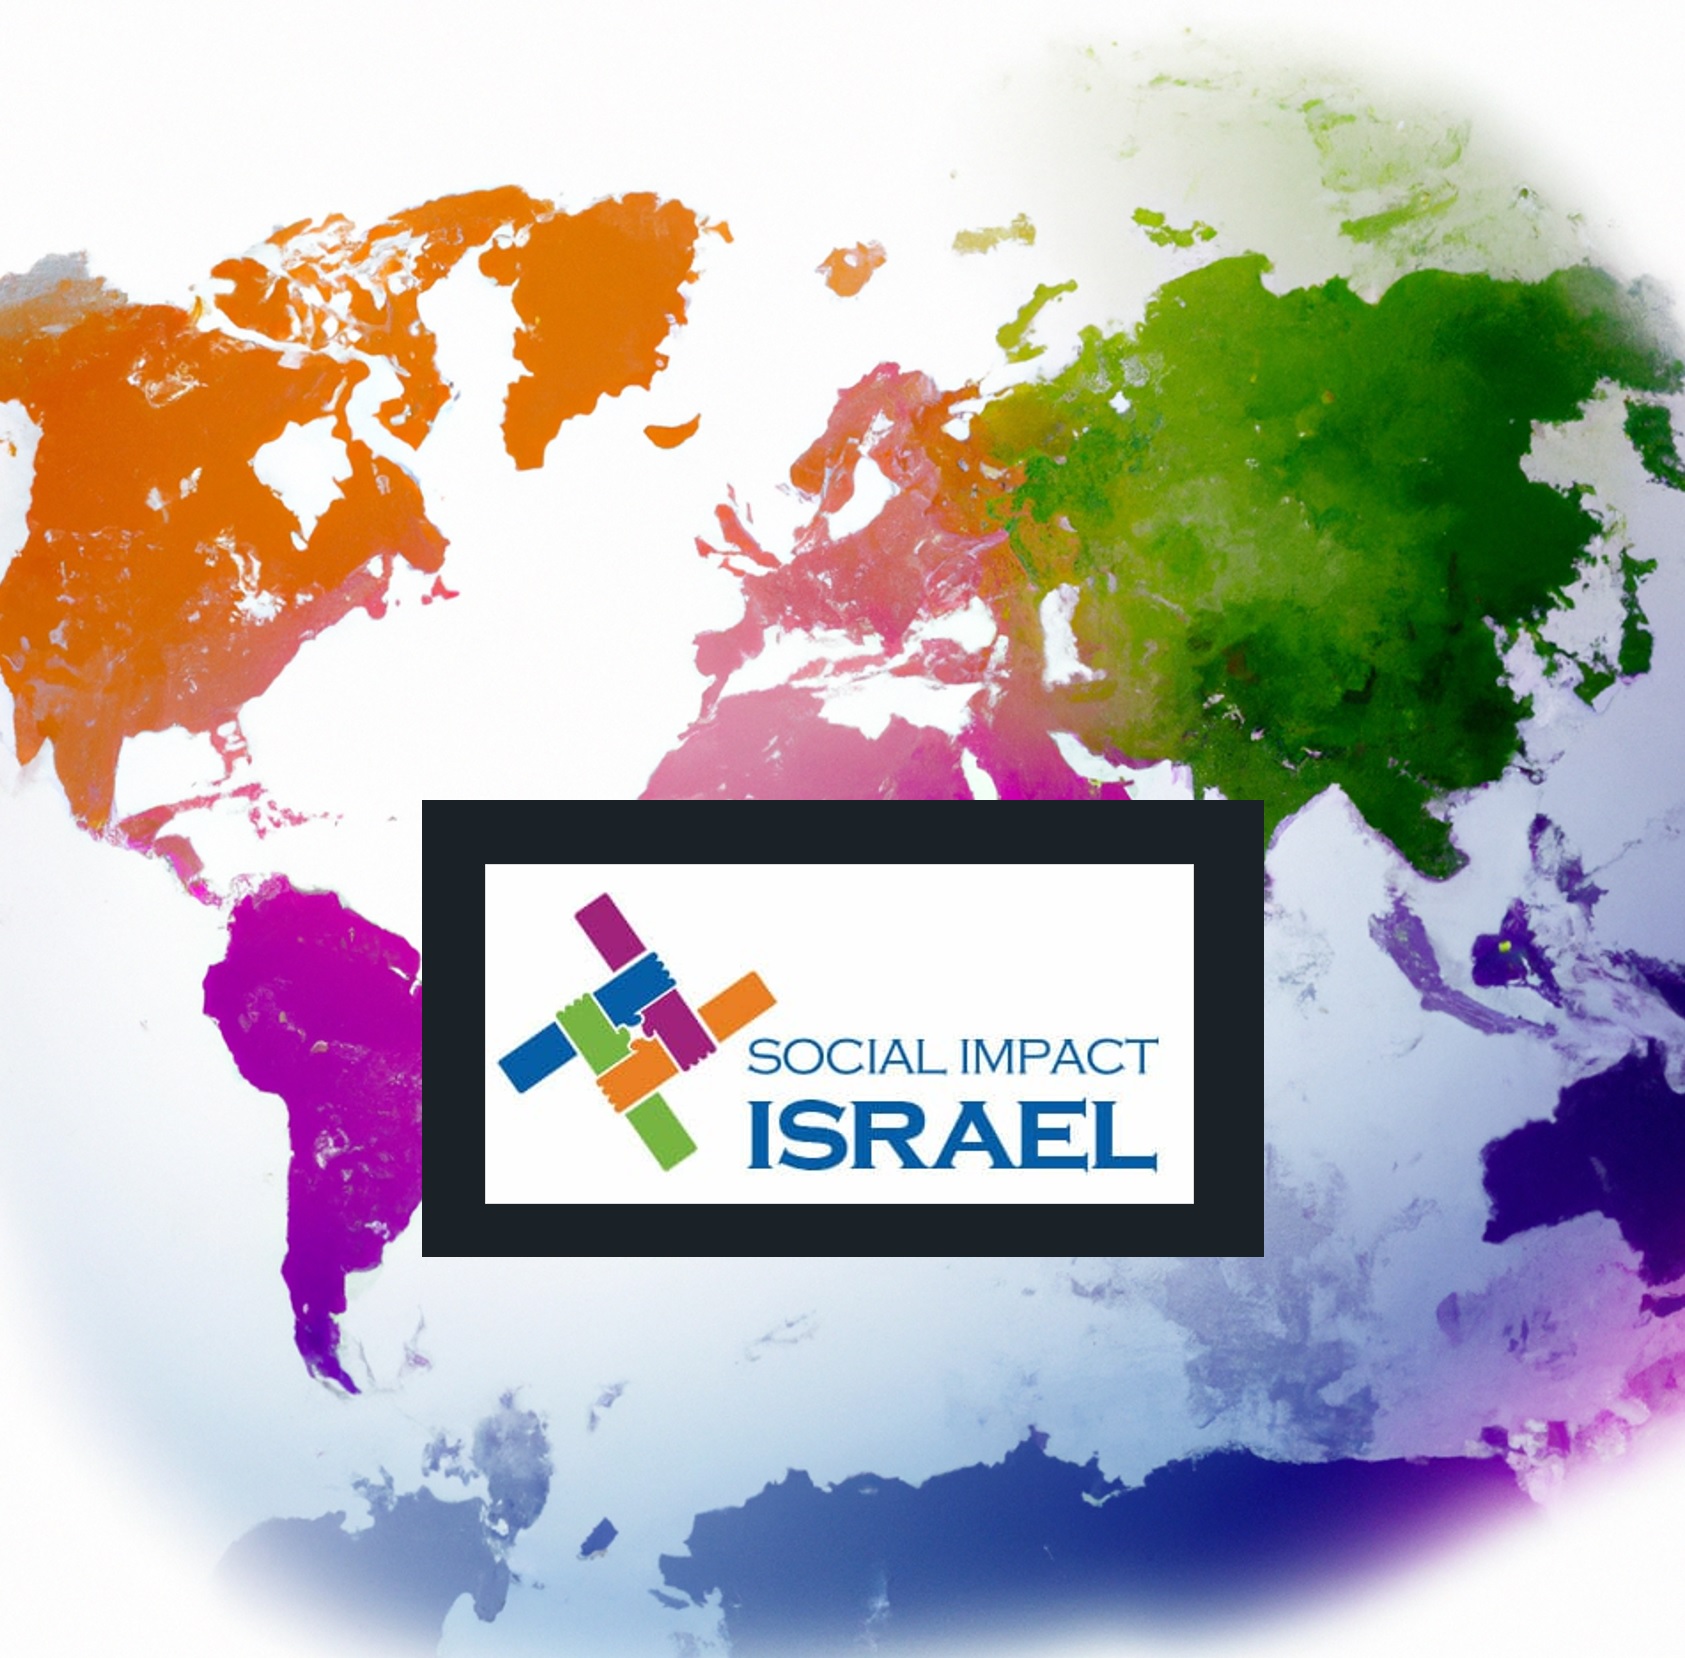 user-friendly interactive social impact map using the latest digital technology available. Israel boasts an incredibly robust social impact, SDG Innovation frontiers in sustainability eco-system.